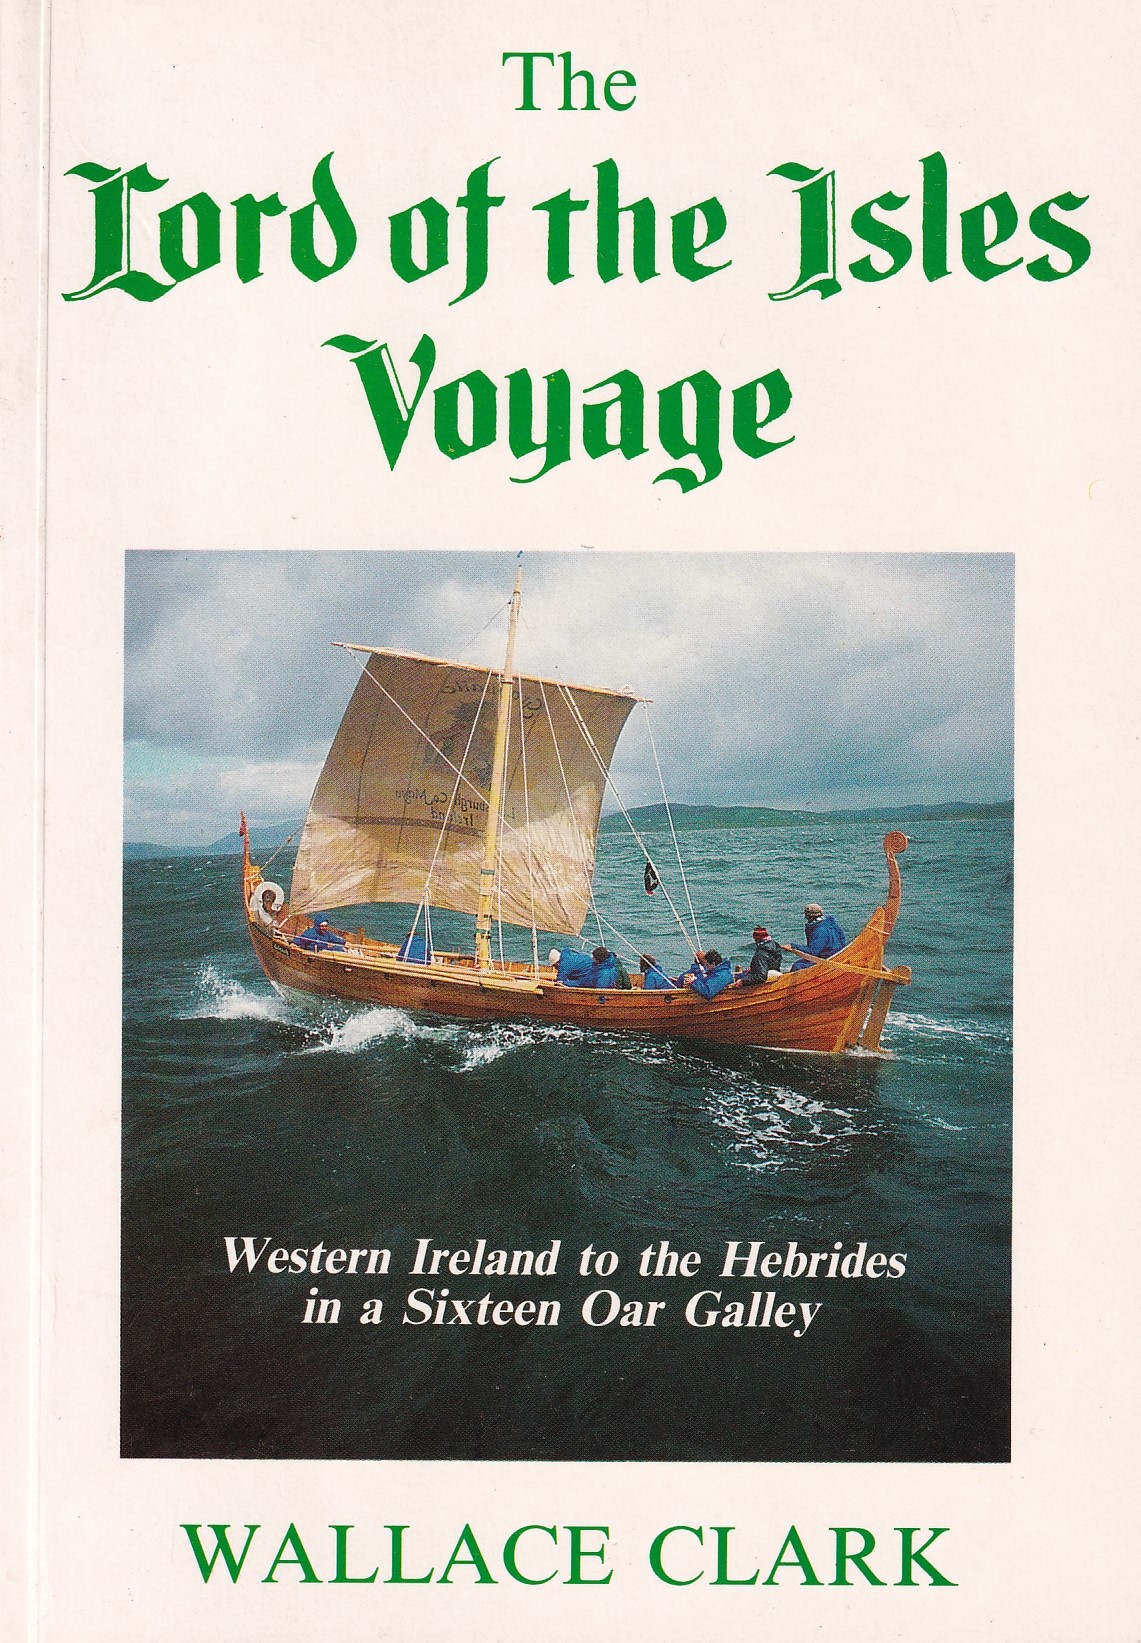 The Lord of the Isles Voyage: Western Ireland to the Hebrides in a Sixteen Oar Galley [Signed] | Wallace Clark | Charlie Byrne's